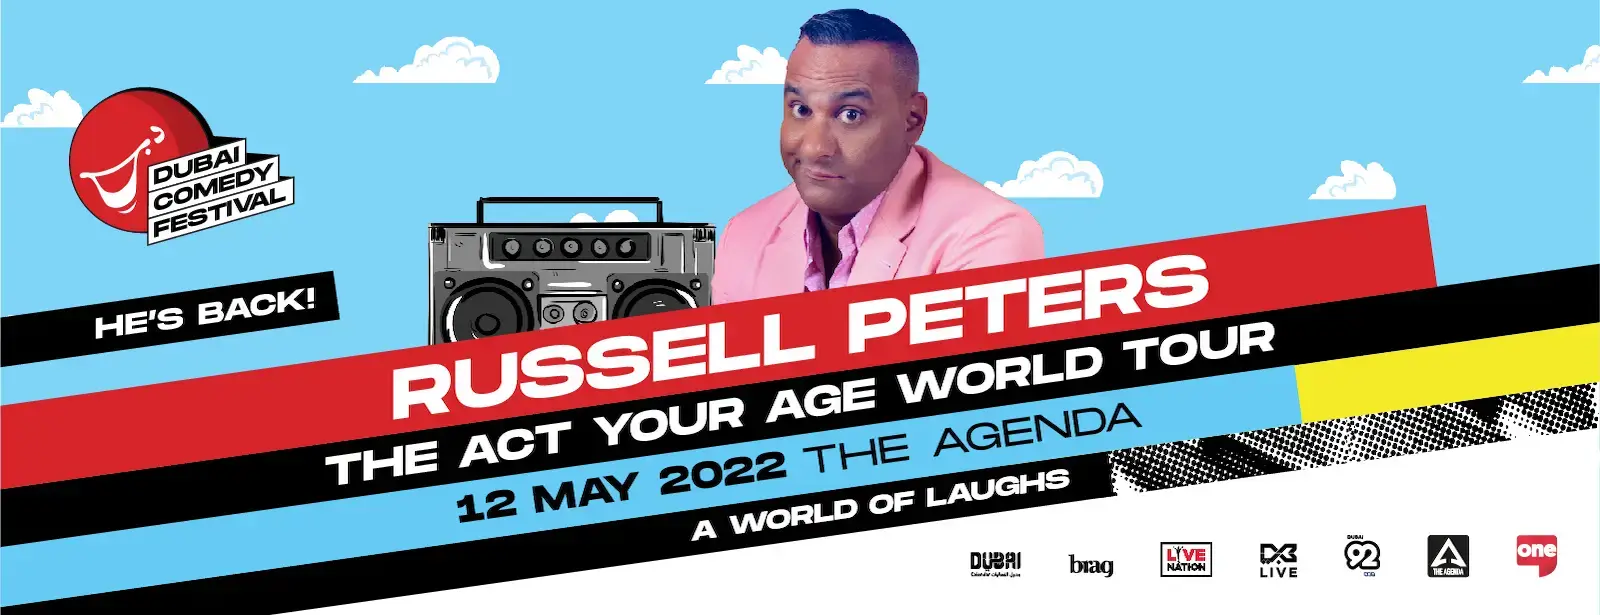 Kickstarting the Dubai Comedy Festival 2022 is the hilarious Russell Peters.